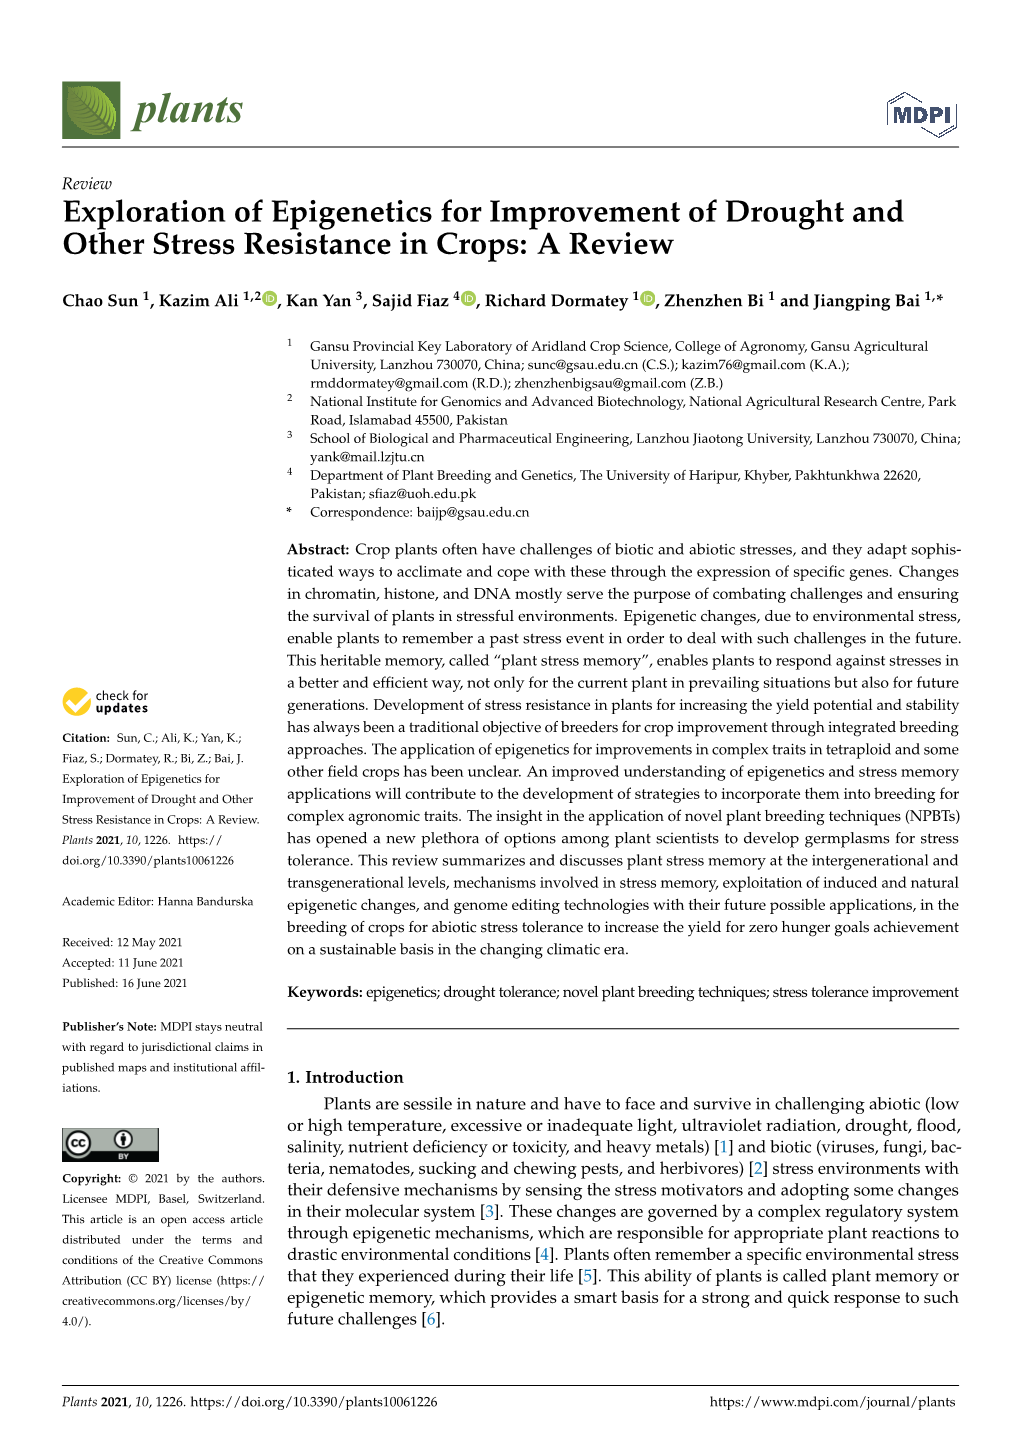 Exploration of Epigenetics for Improvement of Drought and Other Stress Resistance in Crops: a Review